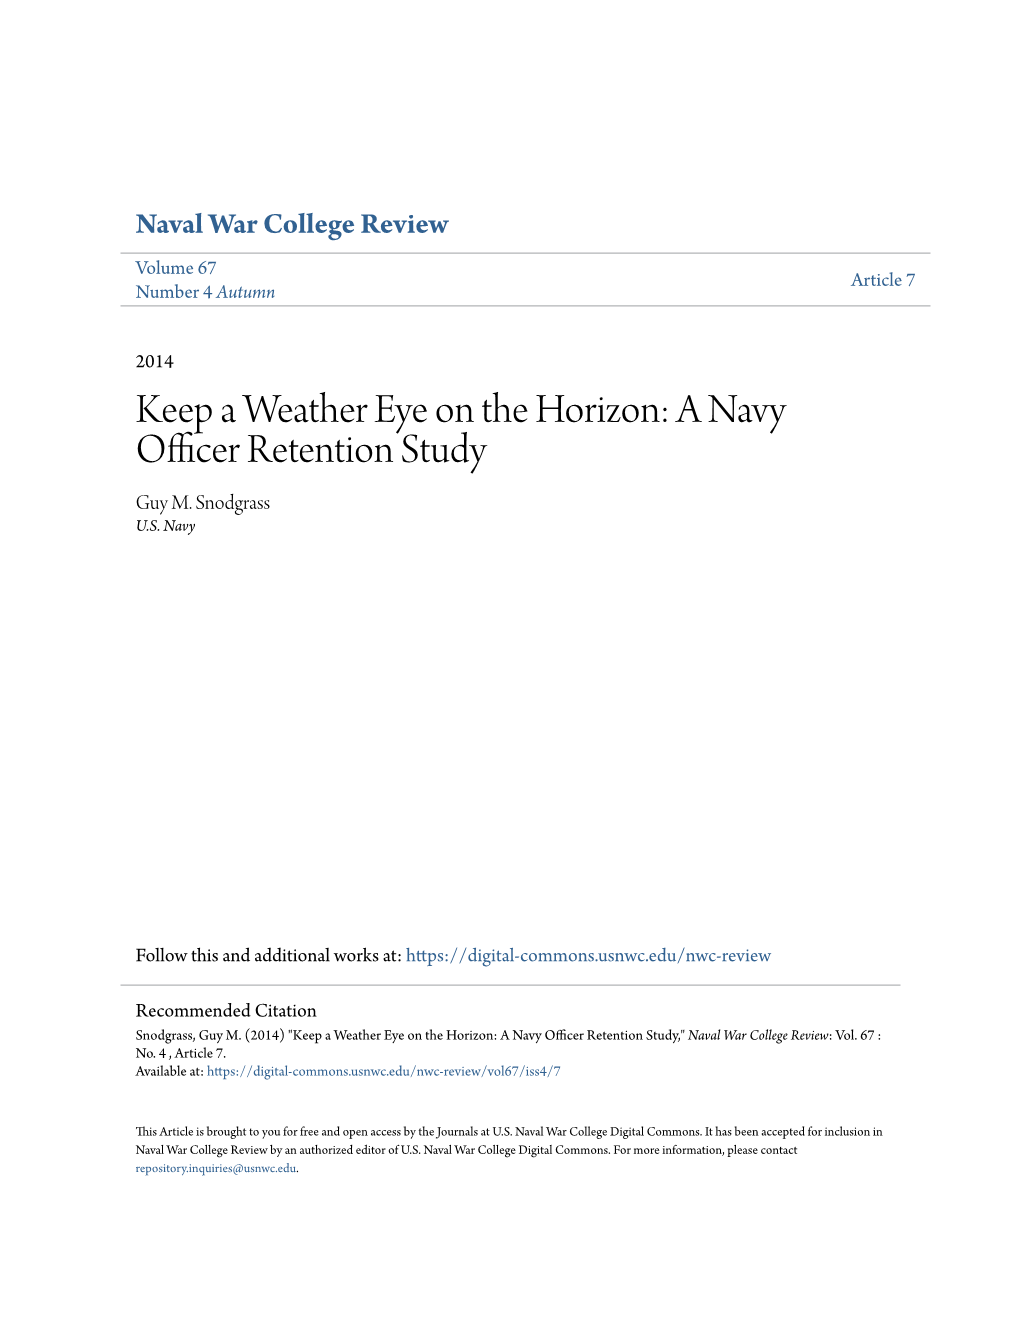 Keep a Weather Eye on the Horizon: a Navy Officer Retention Study Guy M